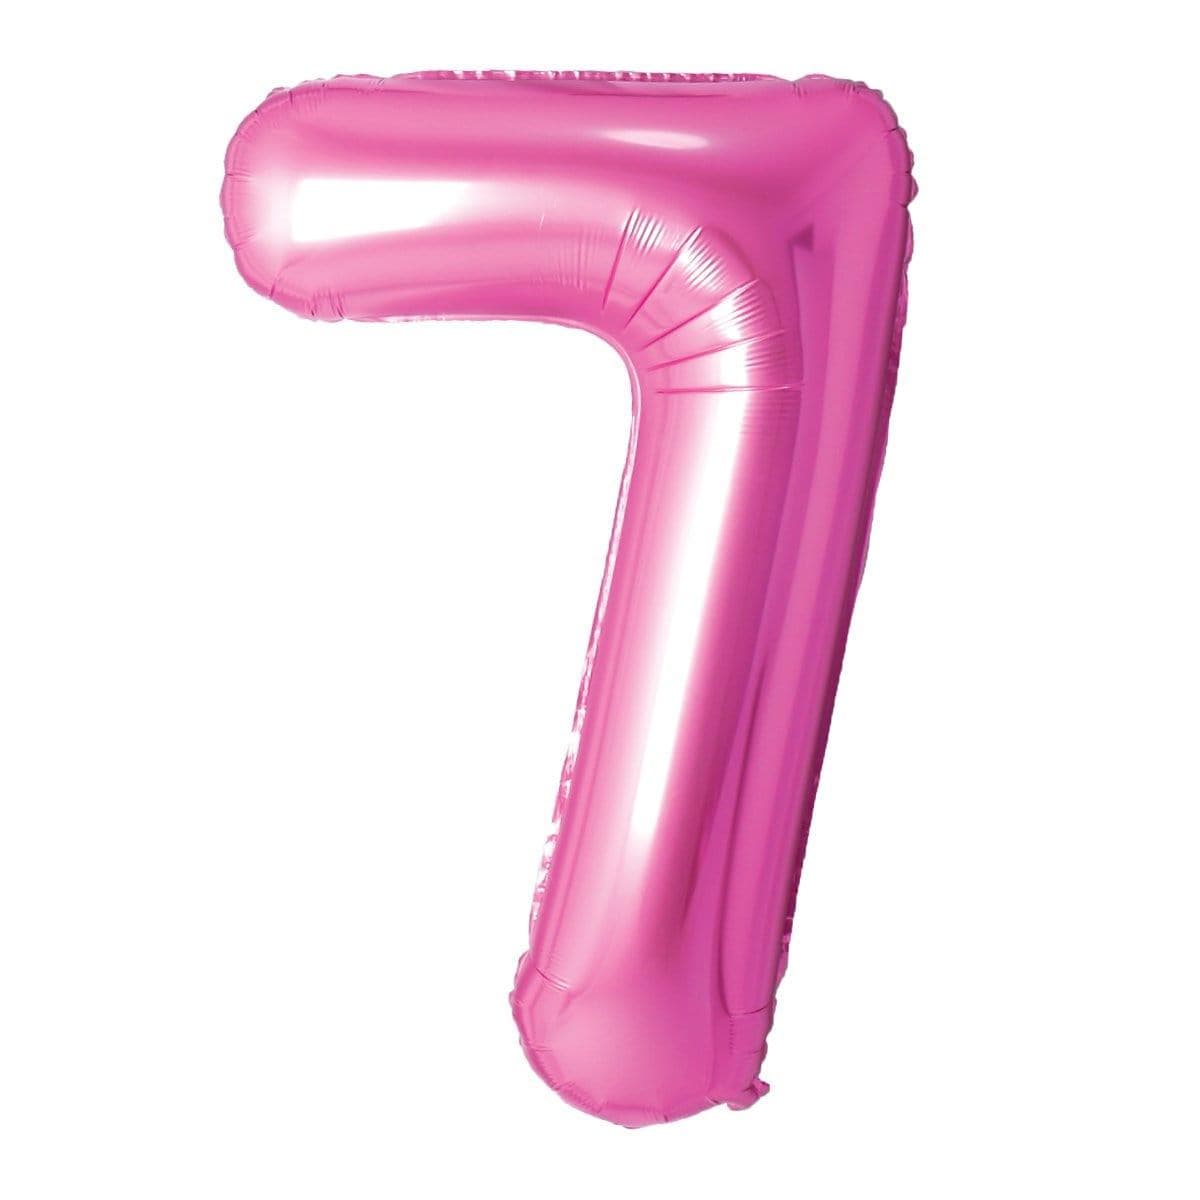 Buy Balloons Pink Number 7 Foil Balloon, 34 Inches sold at Party Expert